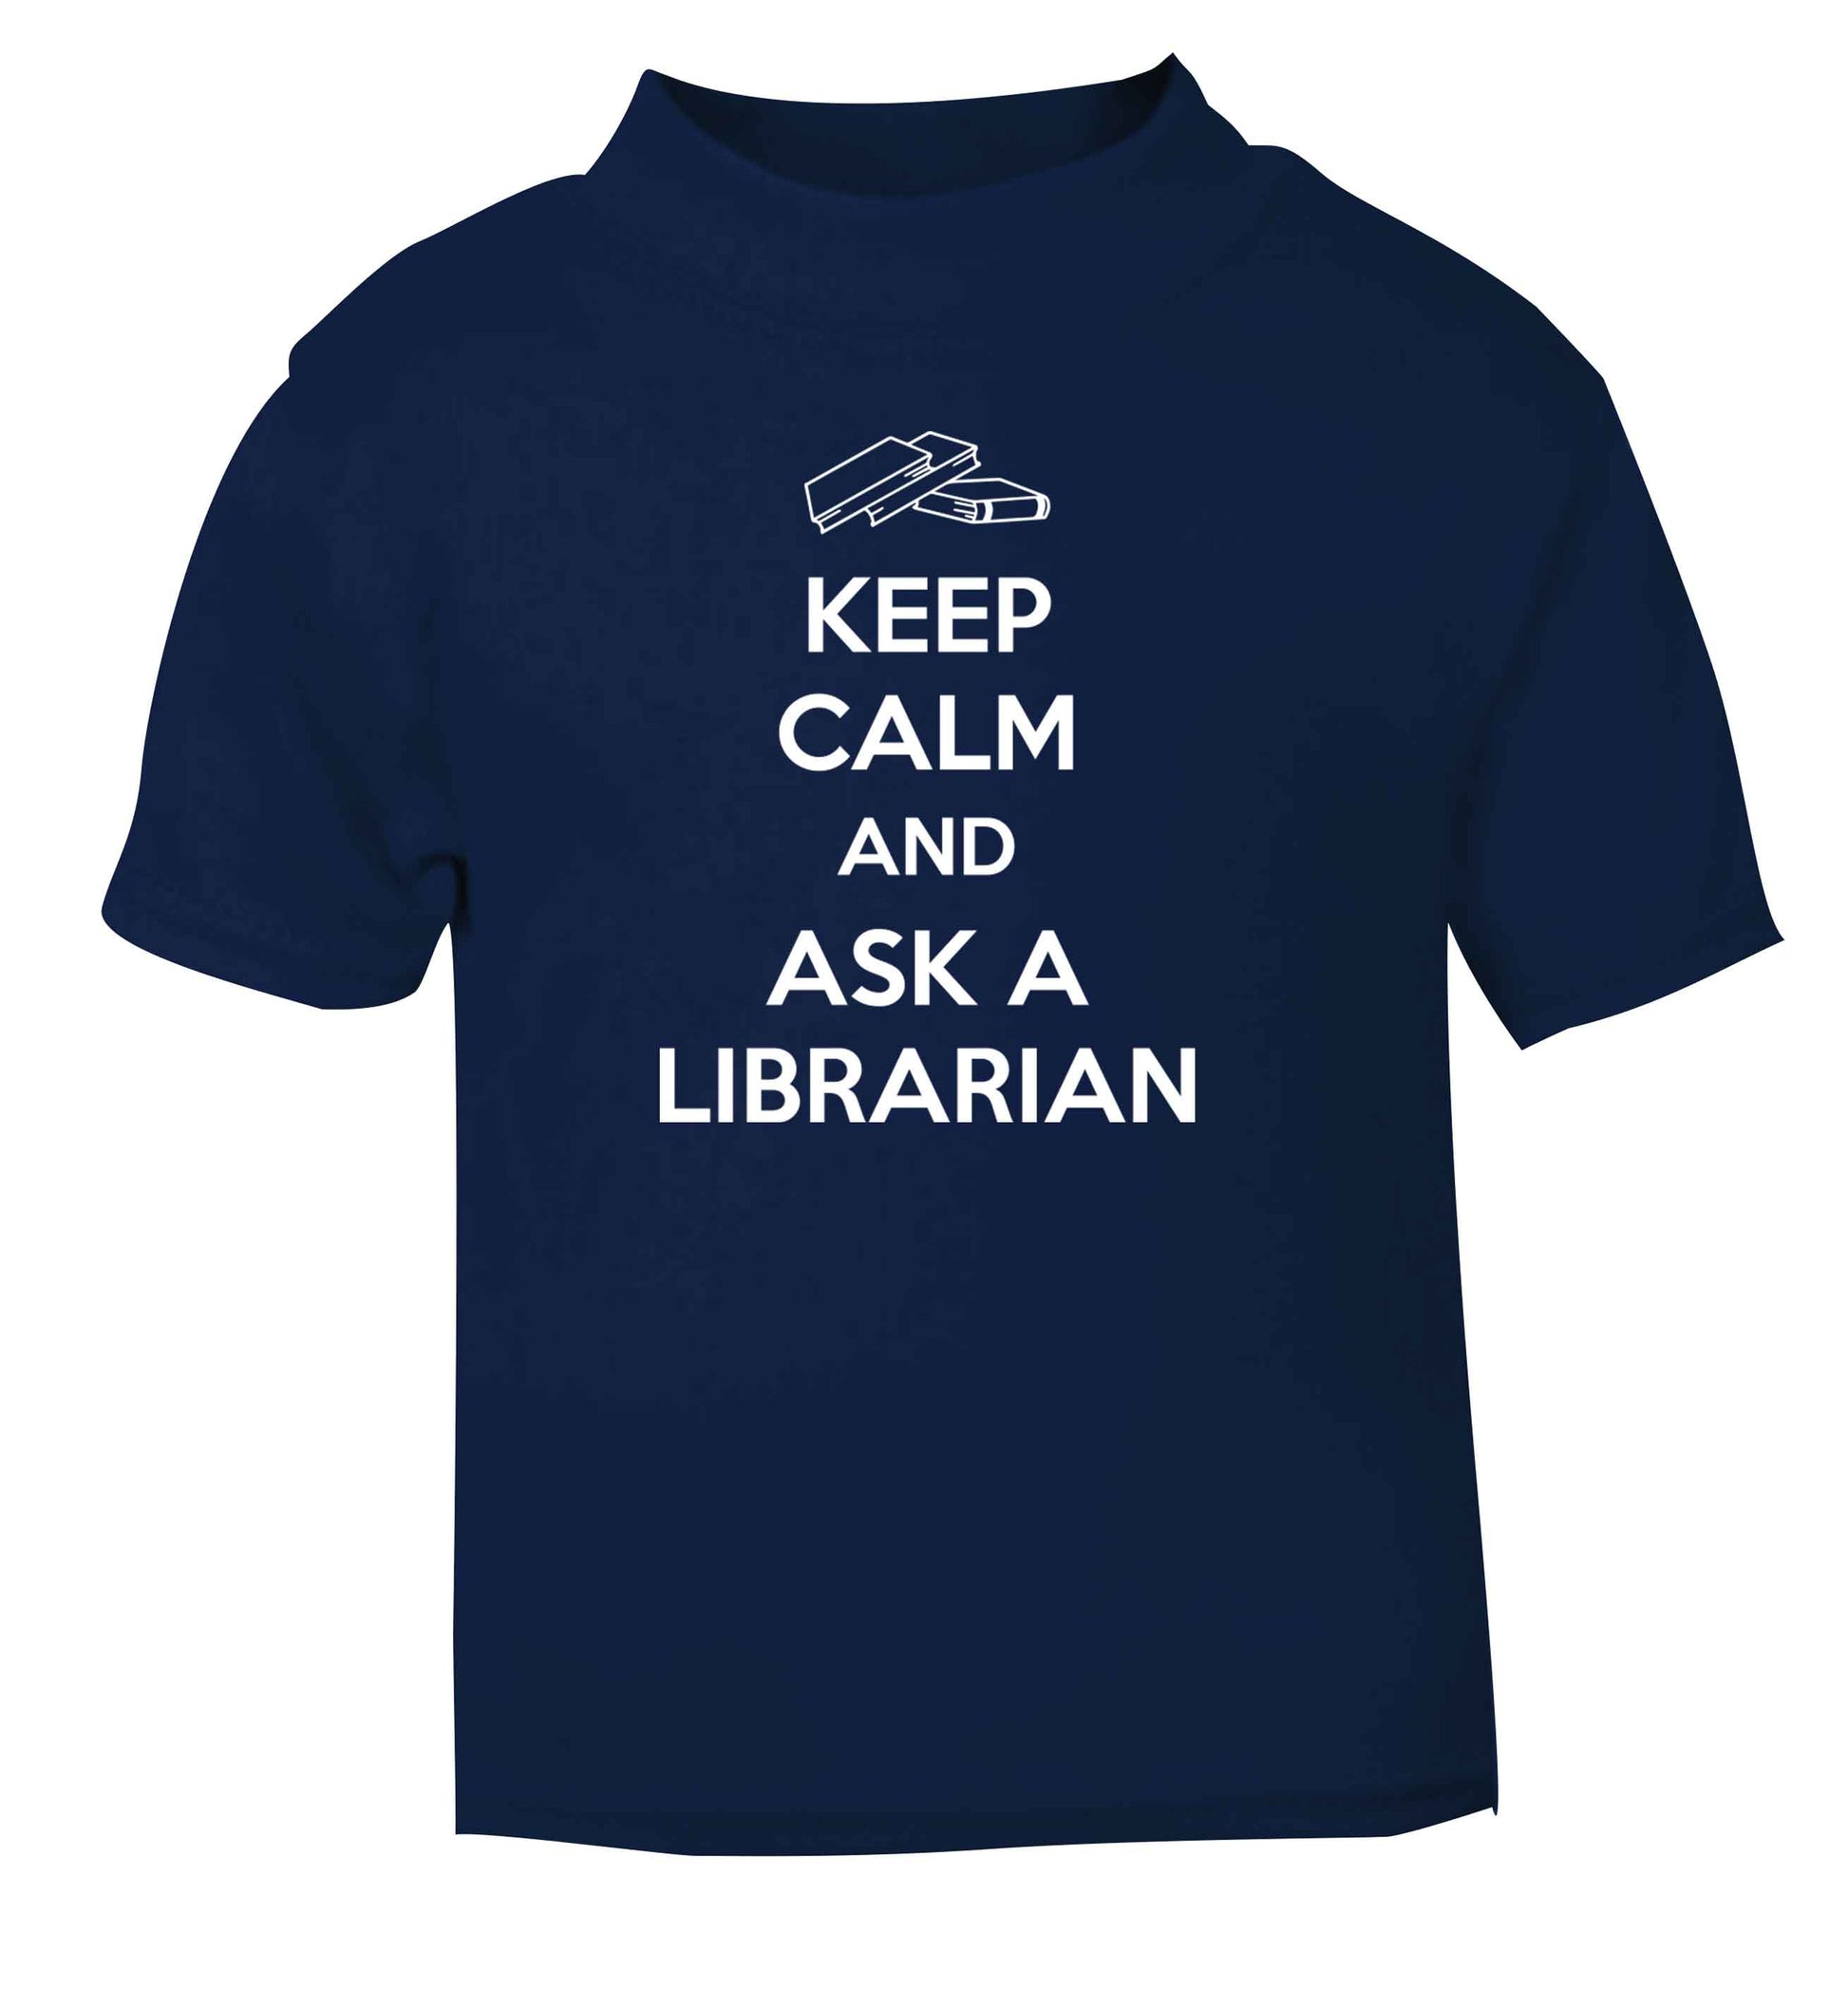 Keep calm and ask a librarian navy Baby Toddler Tshirt 2 Years